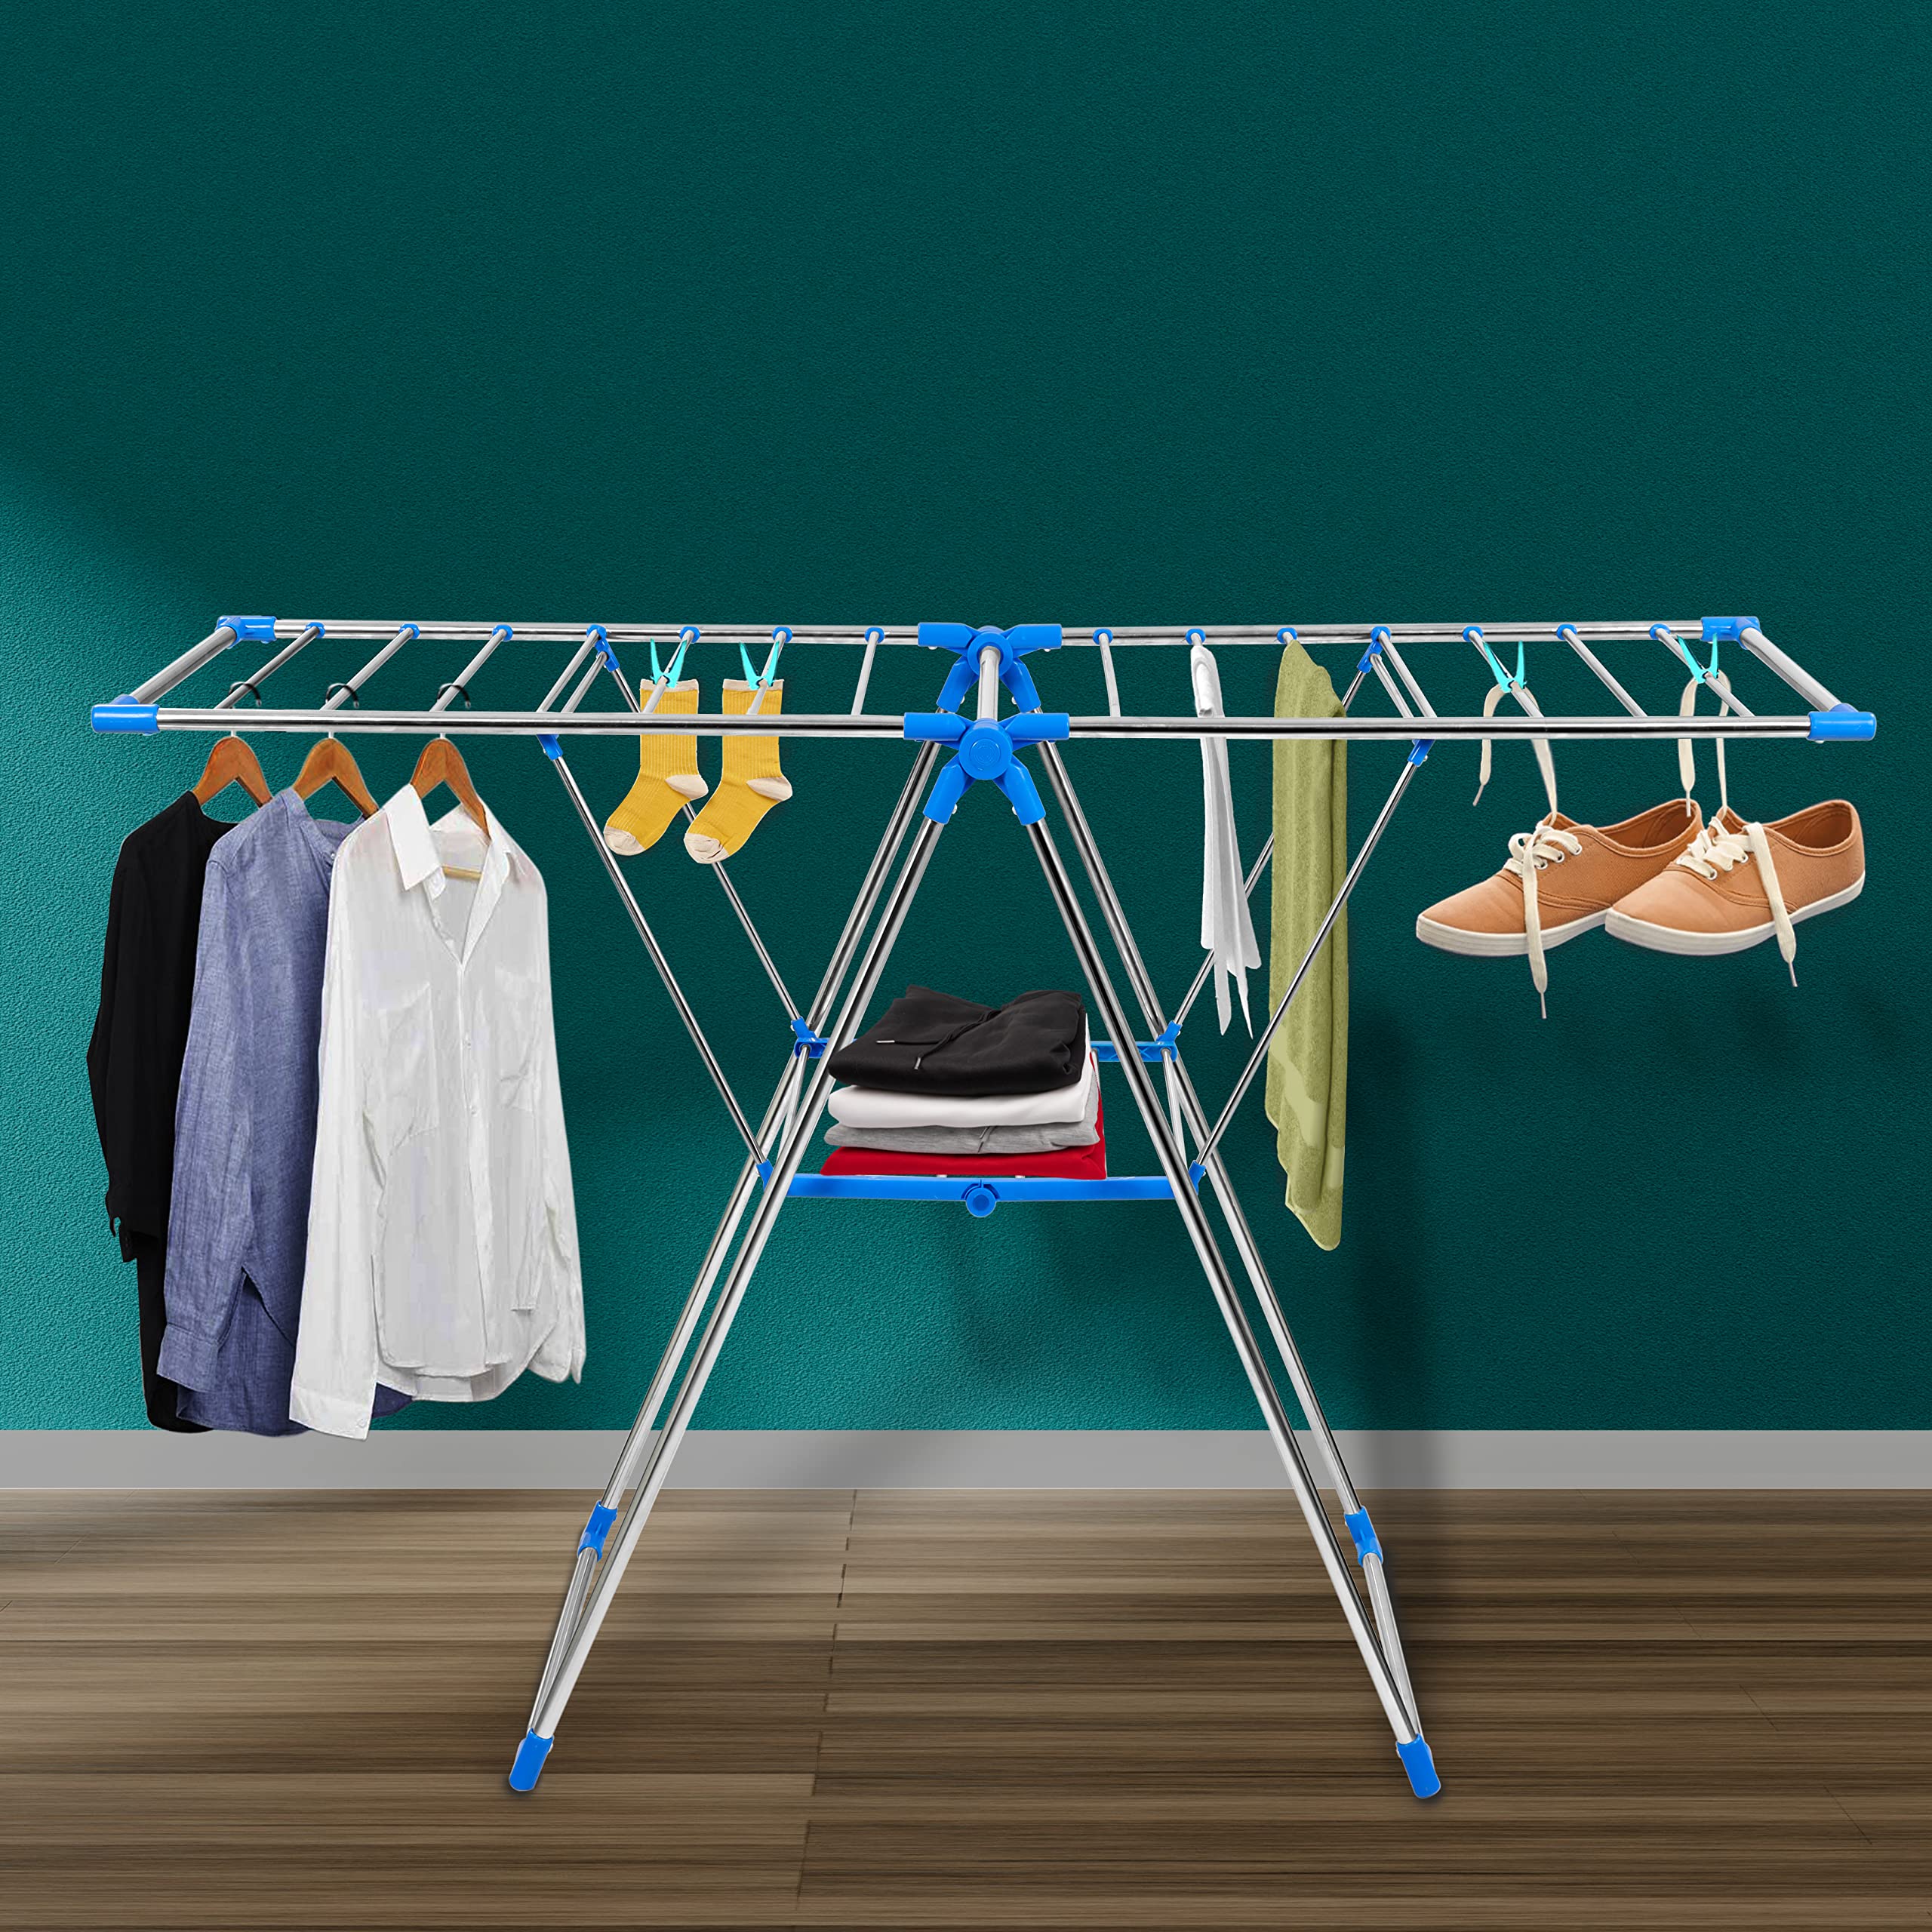 Plantex Stainless Steel Foldable Cloth Drying Rack/Cloth Hanger Stand for Home/Movable Cloth Rack - (Silver & Blue)